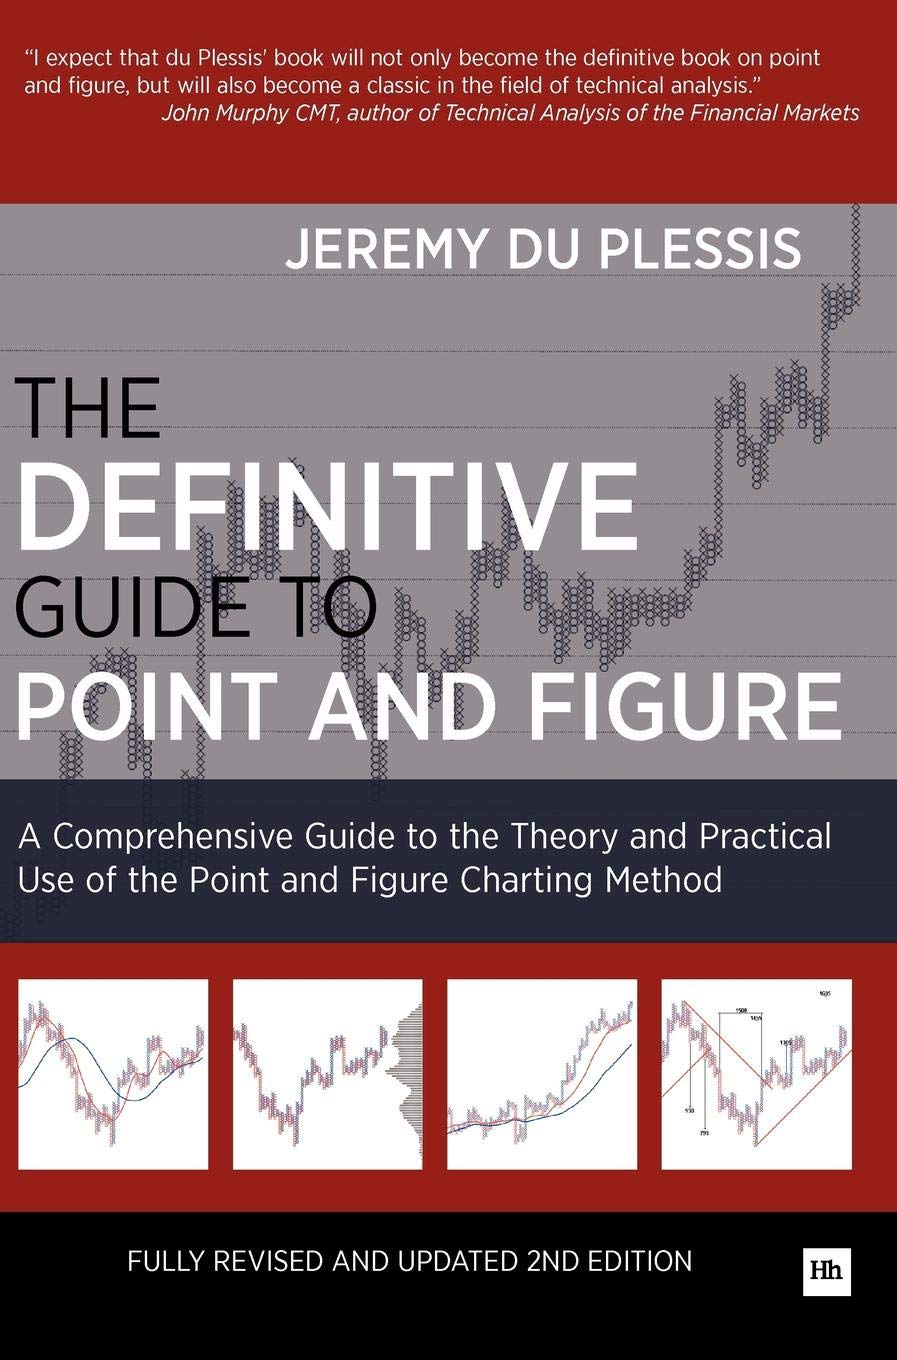 [Jeremy Du Plessis] The Definitive Guide to Point and Figure